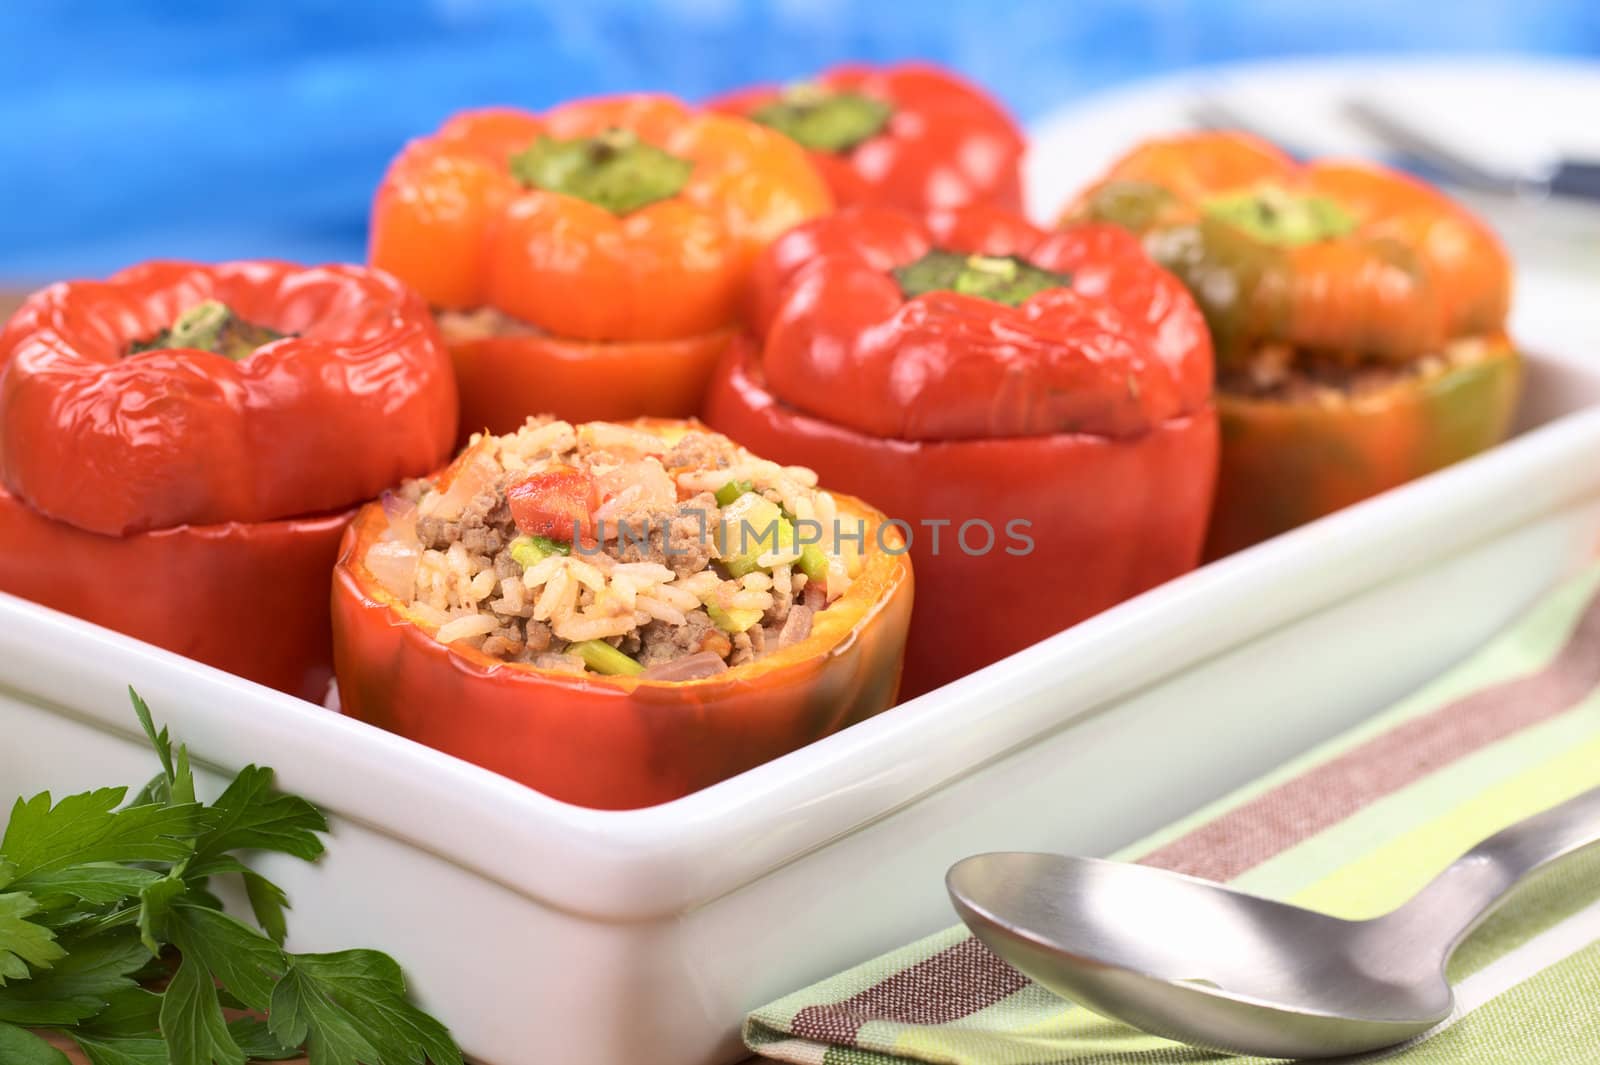 Baked Stuffed Red Bell Pepper by ildi